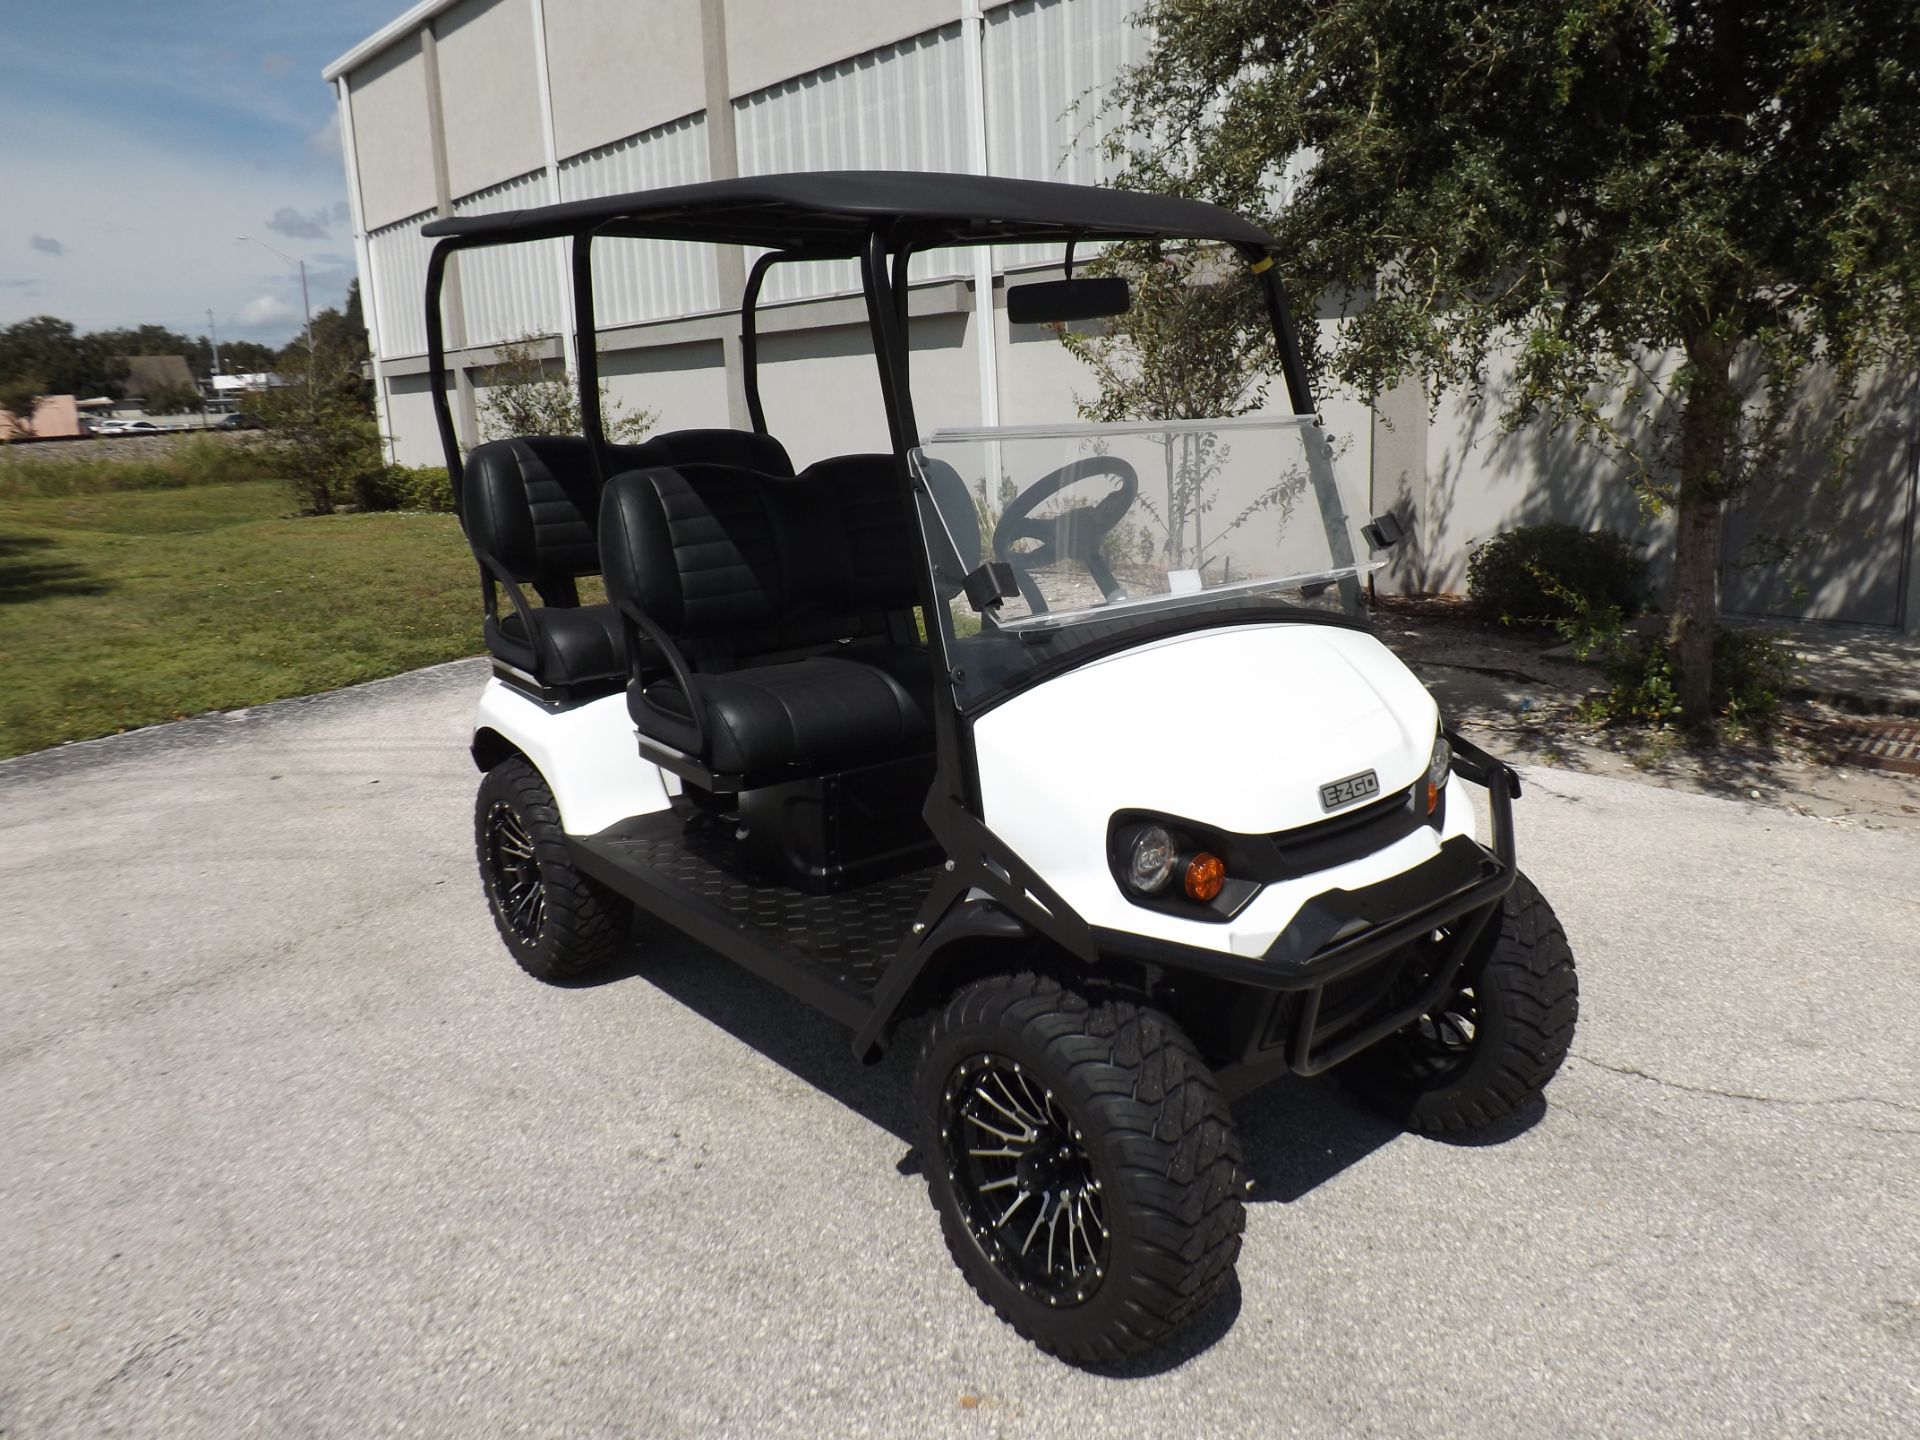 2023 E-Z-GO Liberty ELiTE 2.2 Single Pack with Light World Charger in Lakeland, Florida - Photo 1